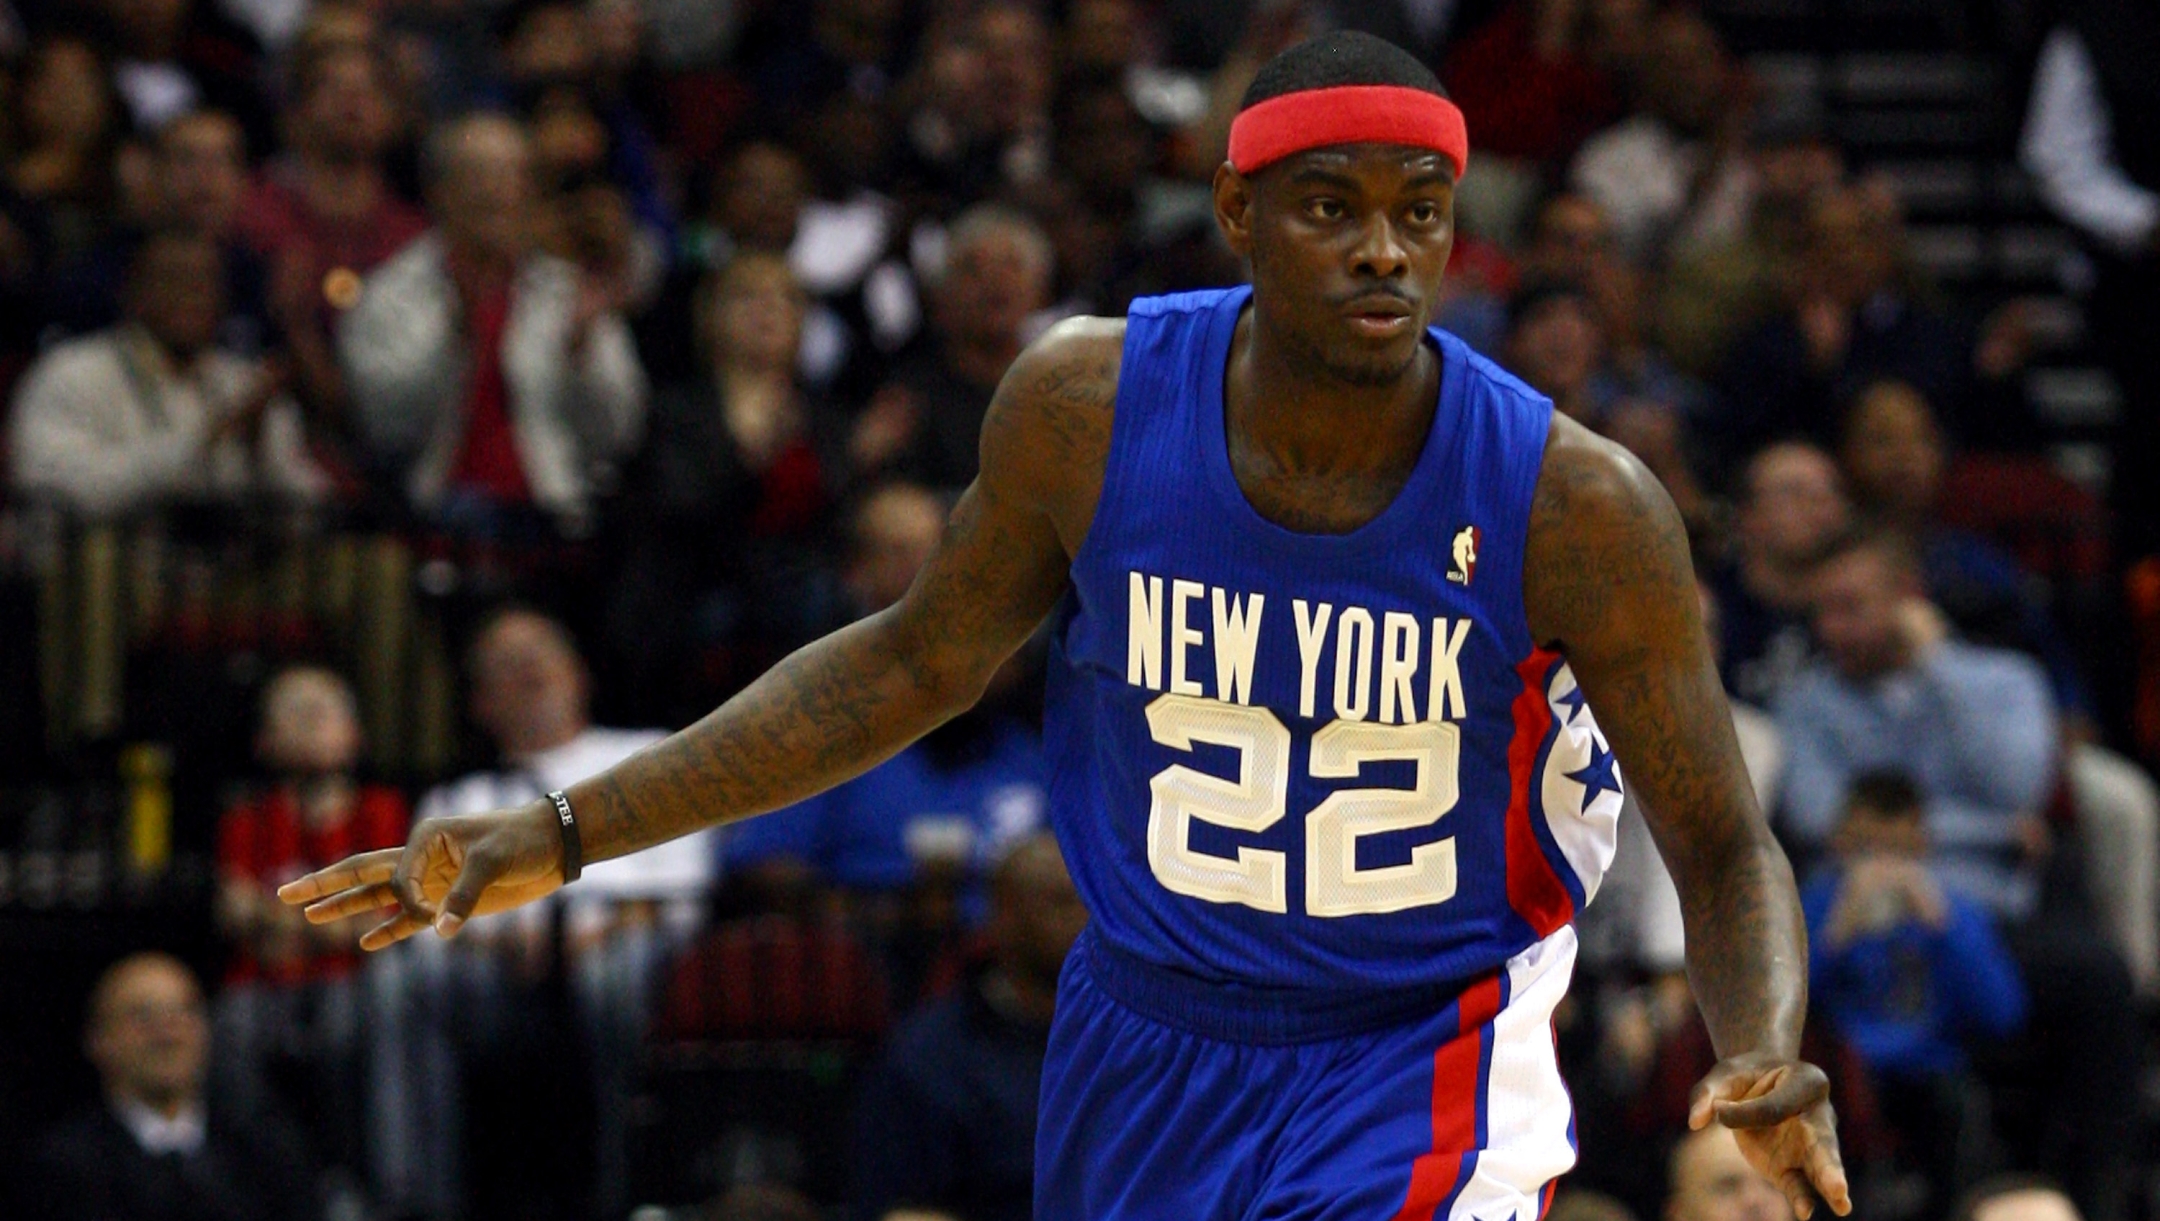 NEWARK, NJ - MARCH 07: Anthony Morrow #22 of the New Jersey Nets reacts after he made a 3-point shot in the first half against the Los Angeles Clippers at Prudential Center on March 7, 2012 in Newark, New Jersey. NOTE TO USER: User expressly acknowledges and agrees that, by downloading and or using this photograph, User is consenting to the terms and conditions of the Getty Images License Agreement.   Chris Chambers/Getty Images/AFP (Photo by Chris Chambers / GETTY IMAGES NORTH AMERICA / Getty Images via AFP)